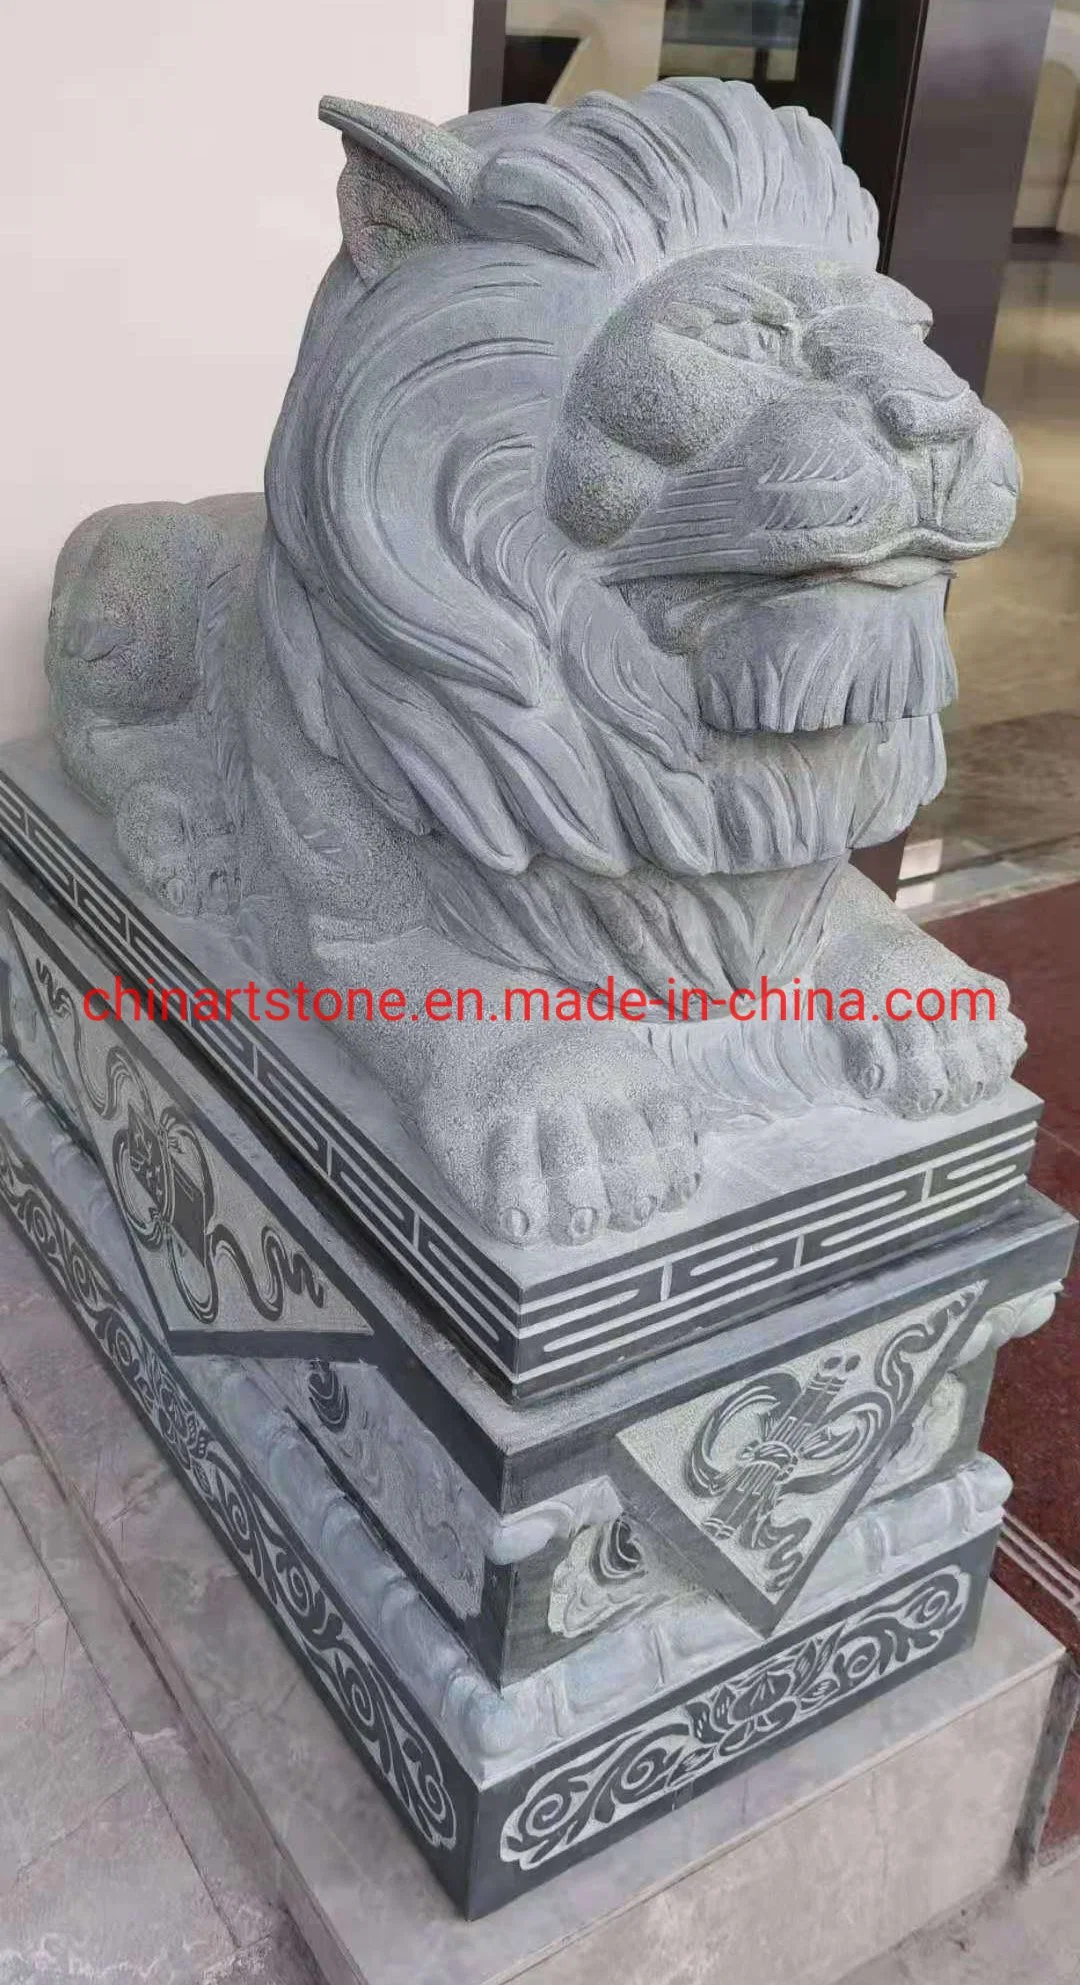 Nature Granite Stone Lions Carving Products for Garden or Door Guarding